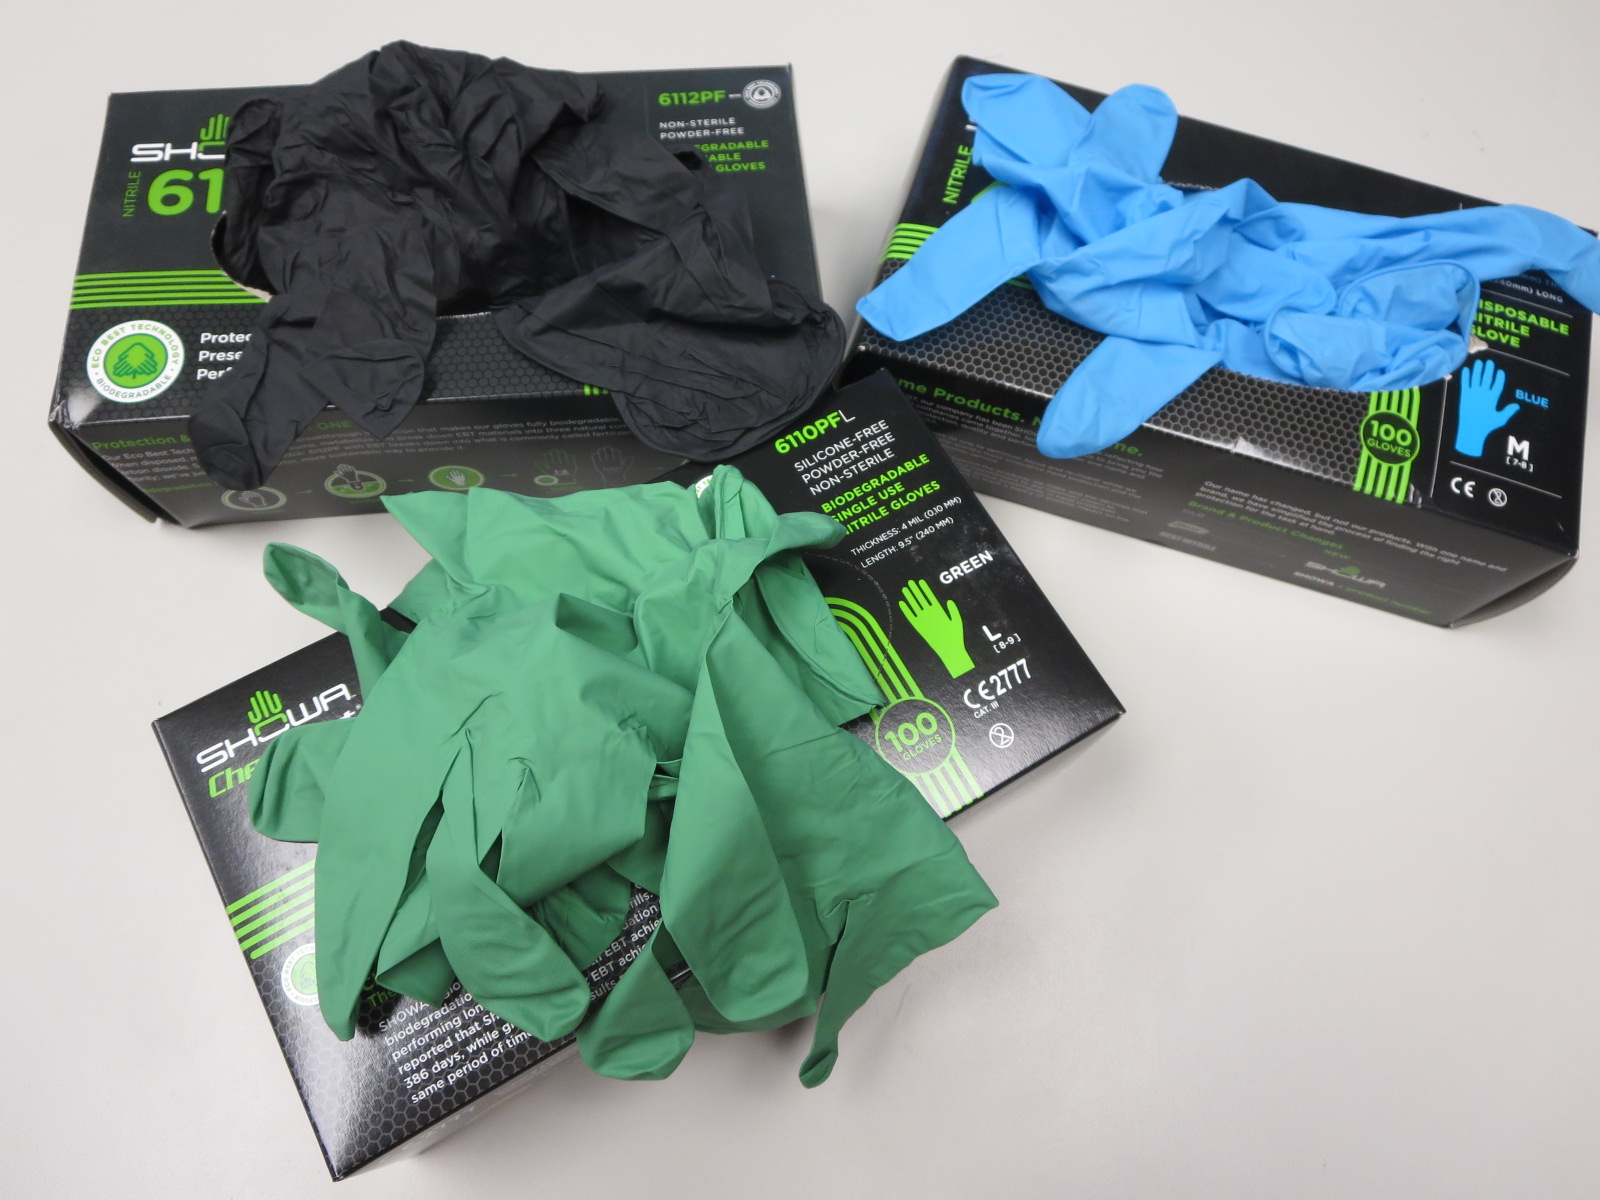 Showa® Biodegradable  Single-Use Powder-Free Nitrile Gloves in green, blue and black colors